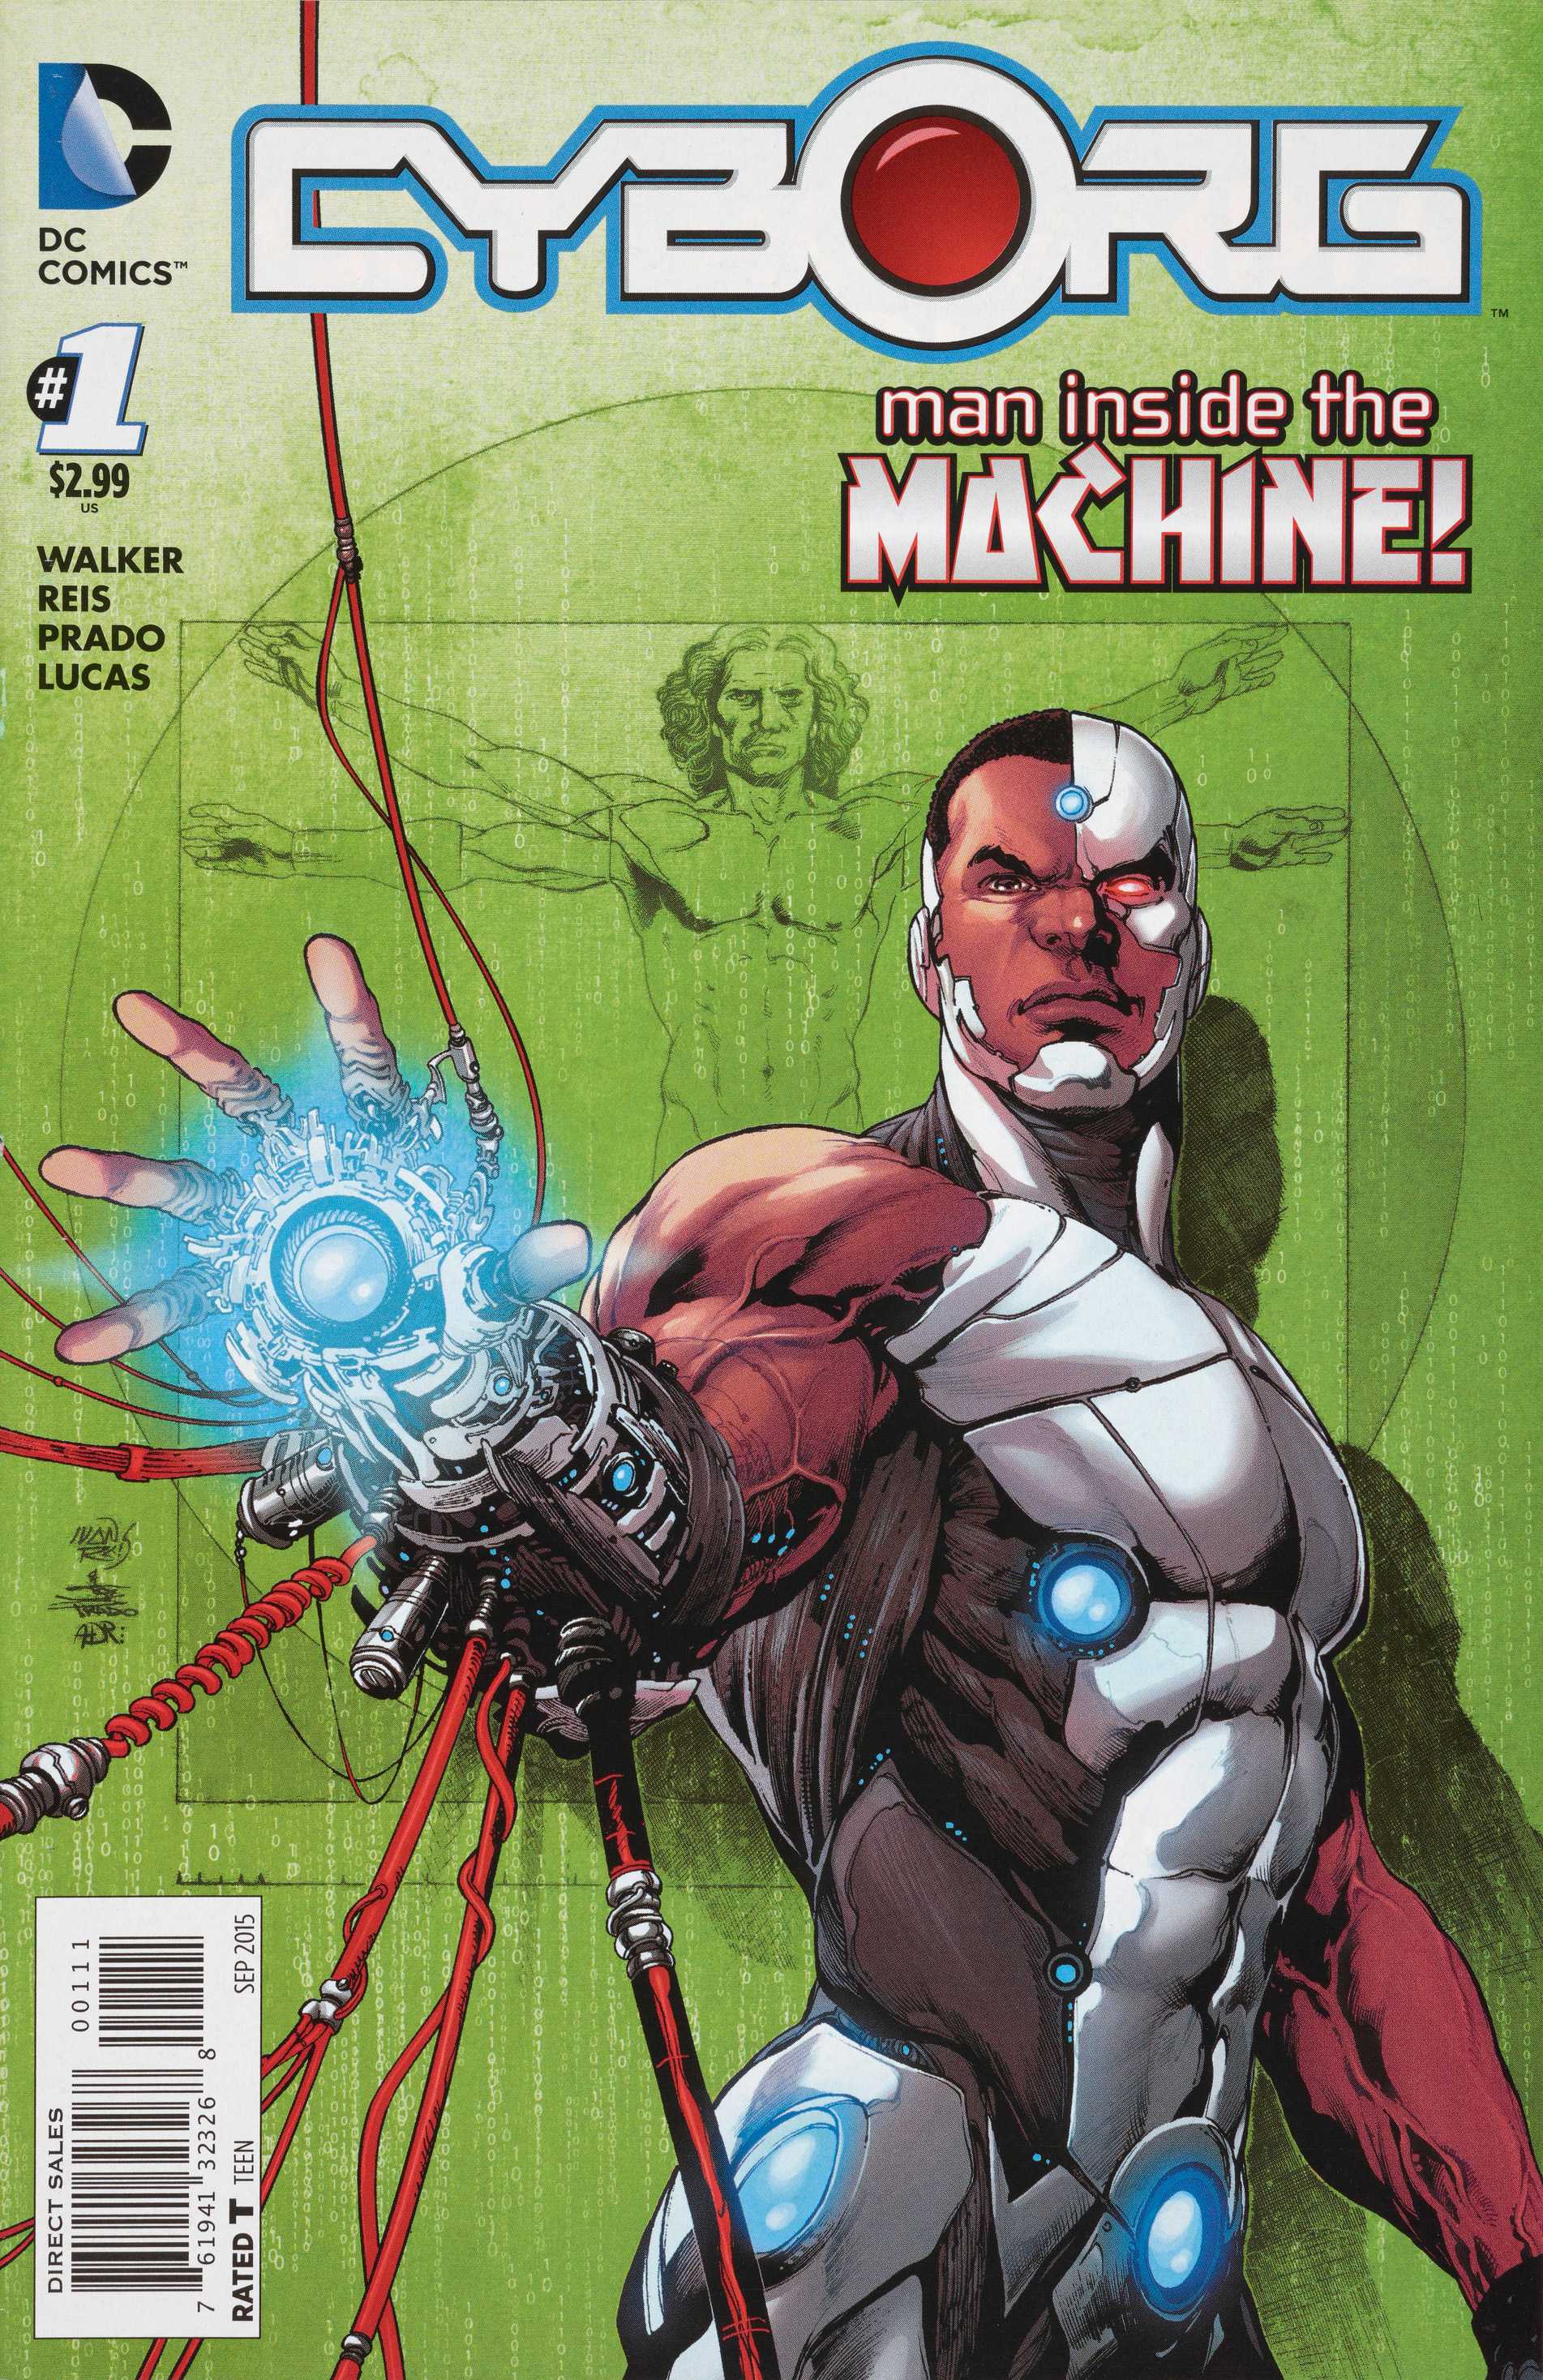 A cover of Cyborg in a powerful pose with his electric hand stretched out. This is against a green background.